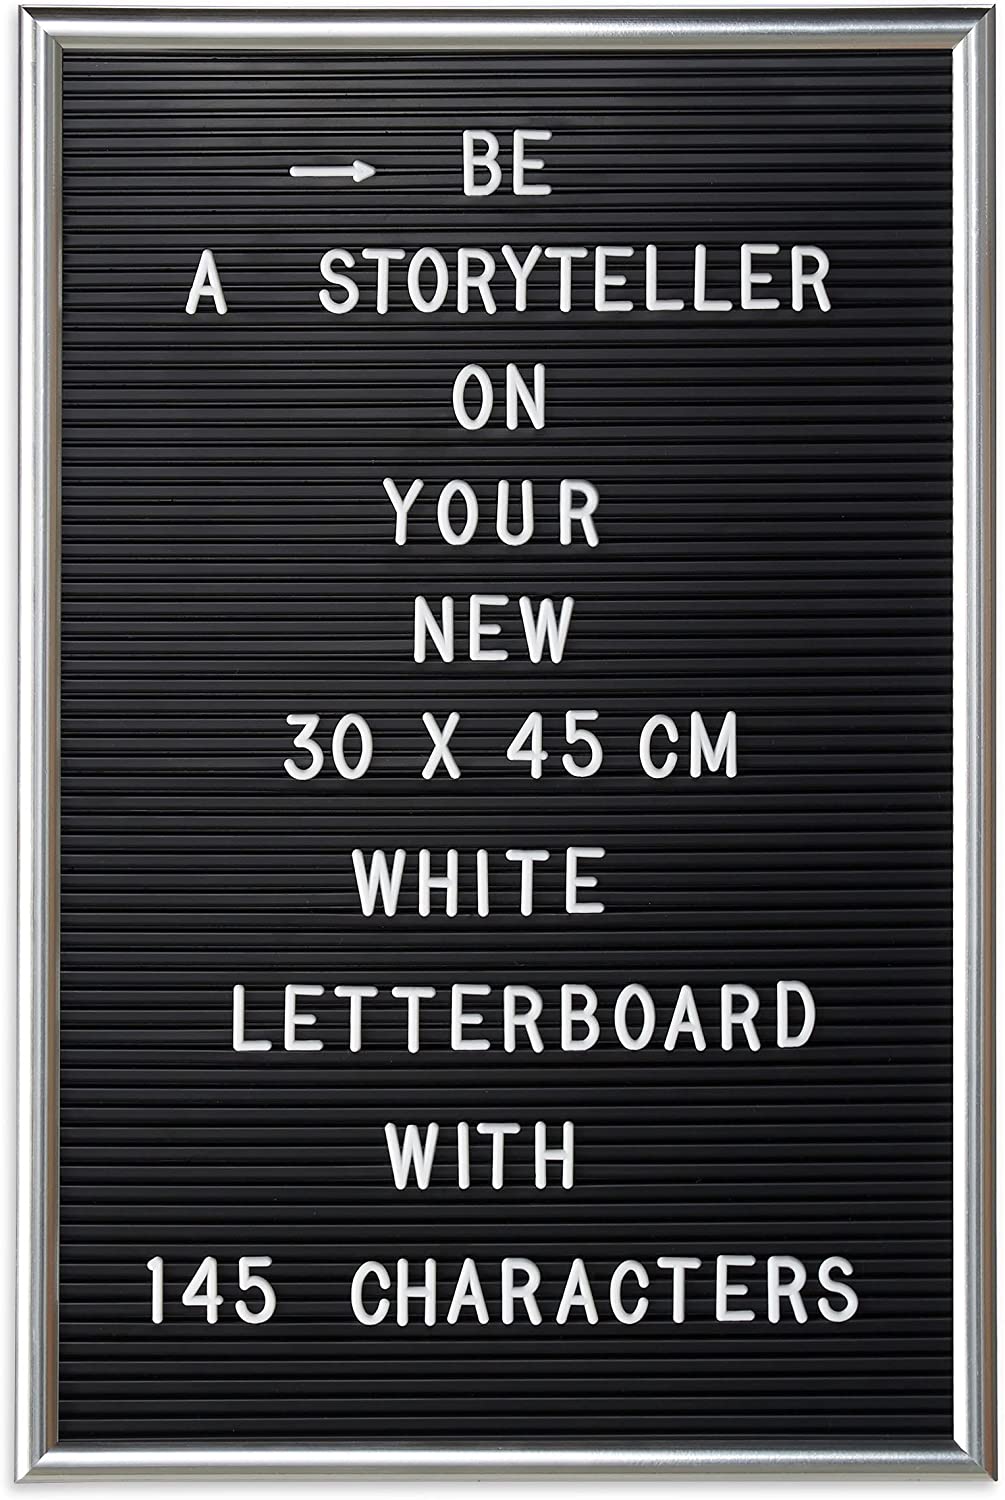 1 x Letterboard with Frame, 145 Letters, Numbers & Special Characters, XL Grooved Board for Pushing, 30 x 45 cm, Silver